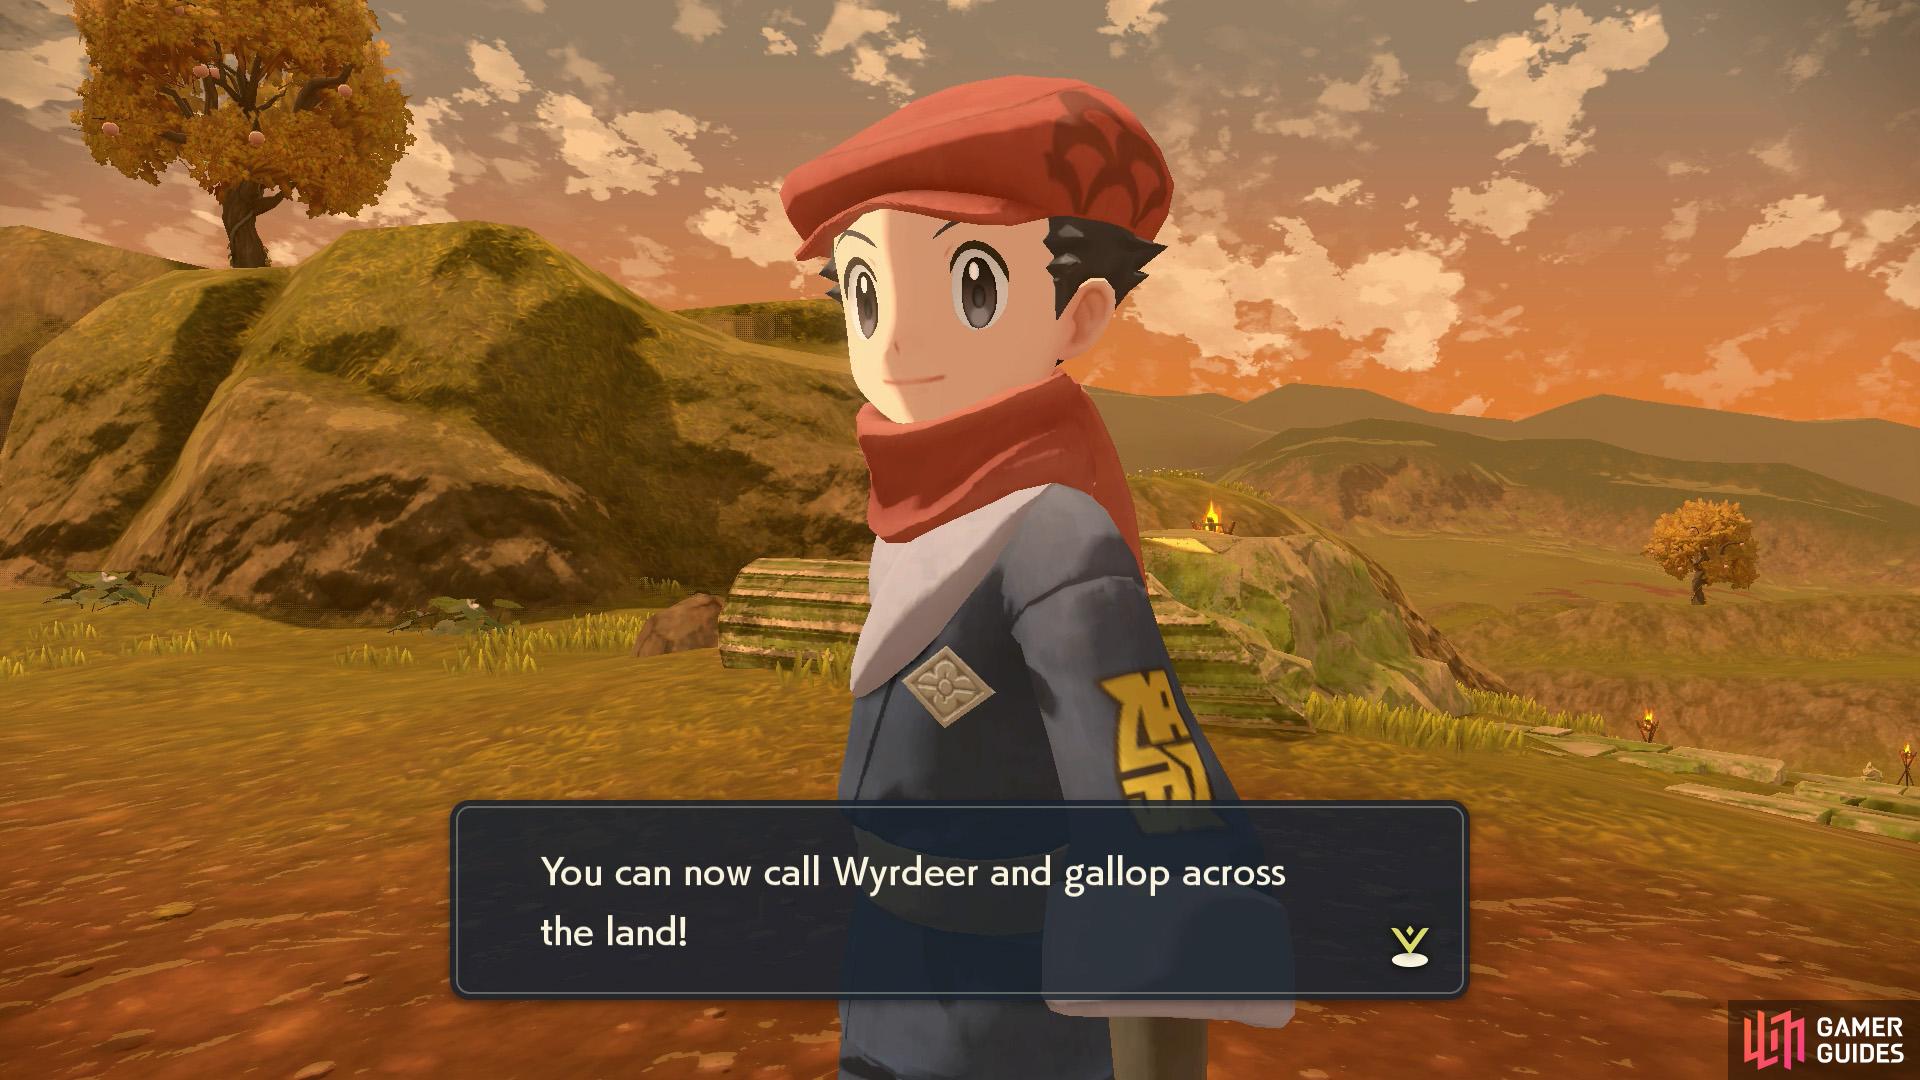 With Wyrdeer, you can move around faster and easily escape from scary Pokémon!